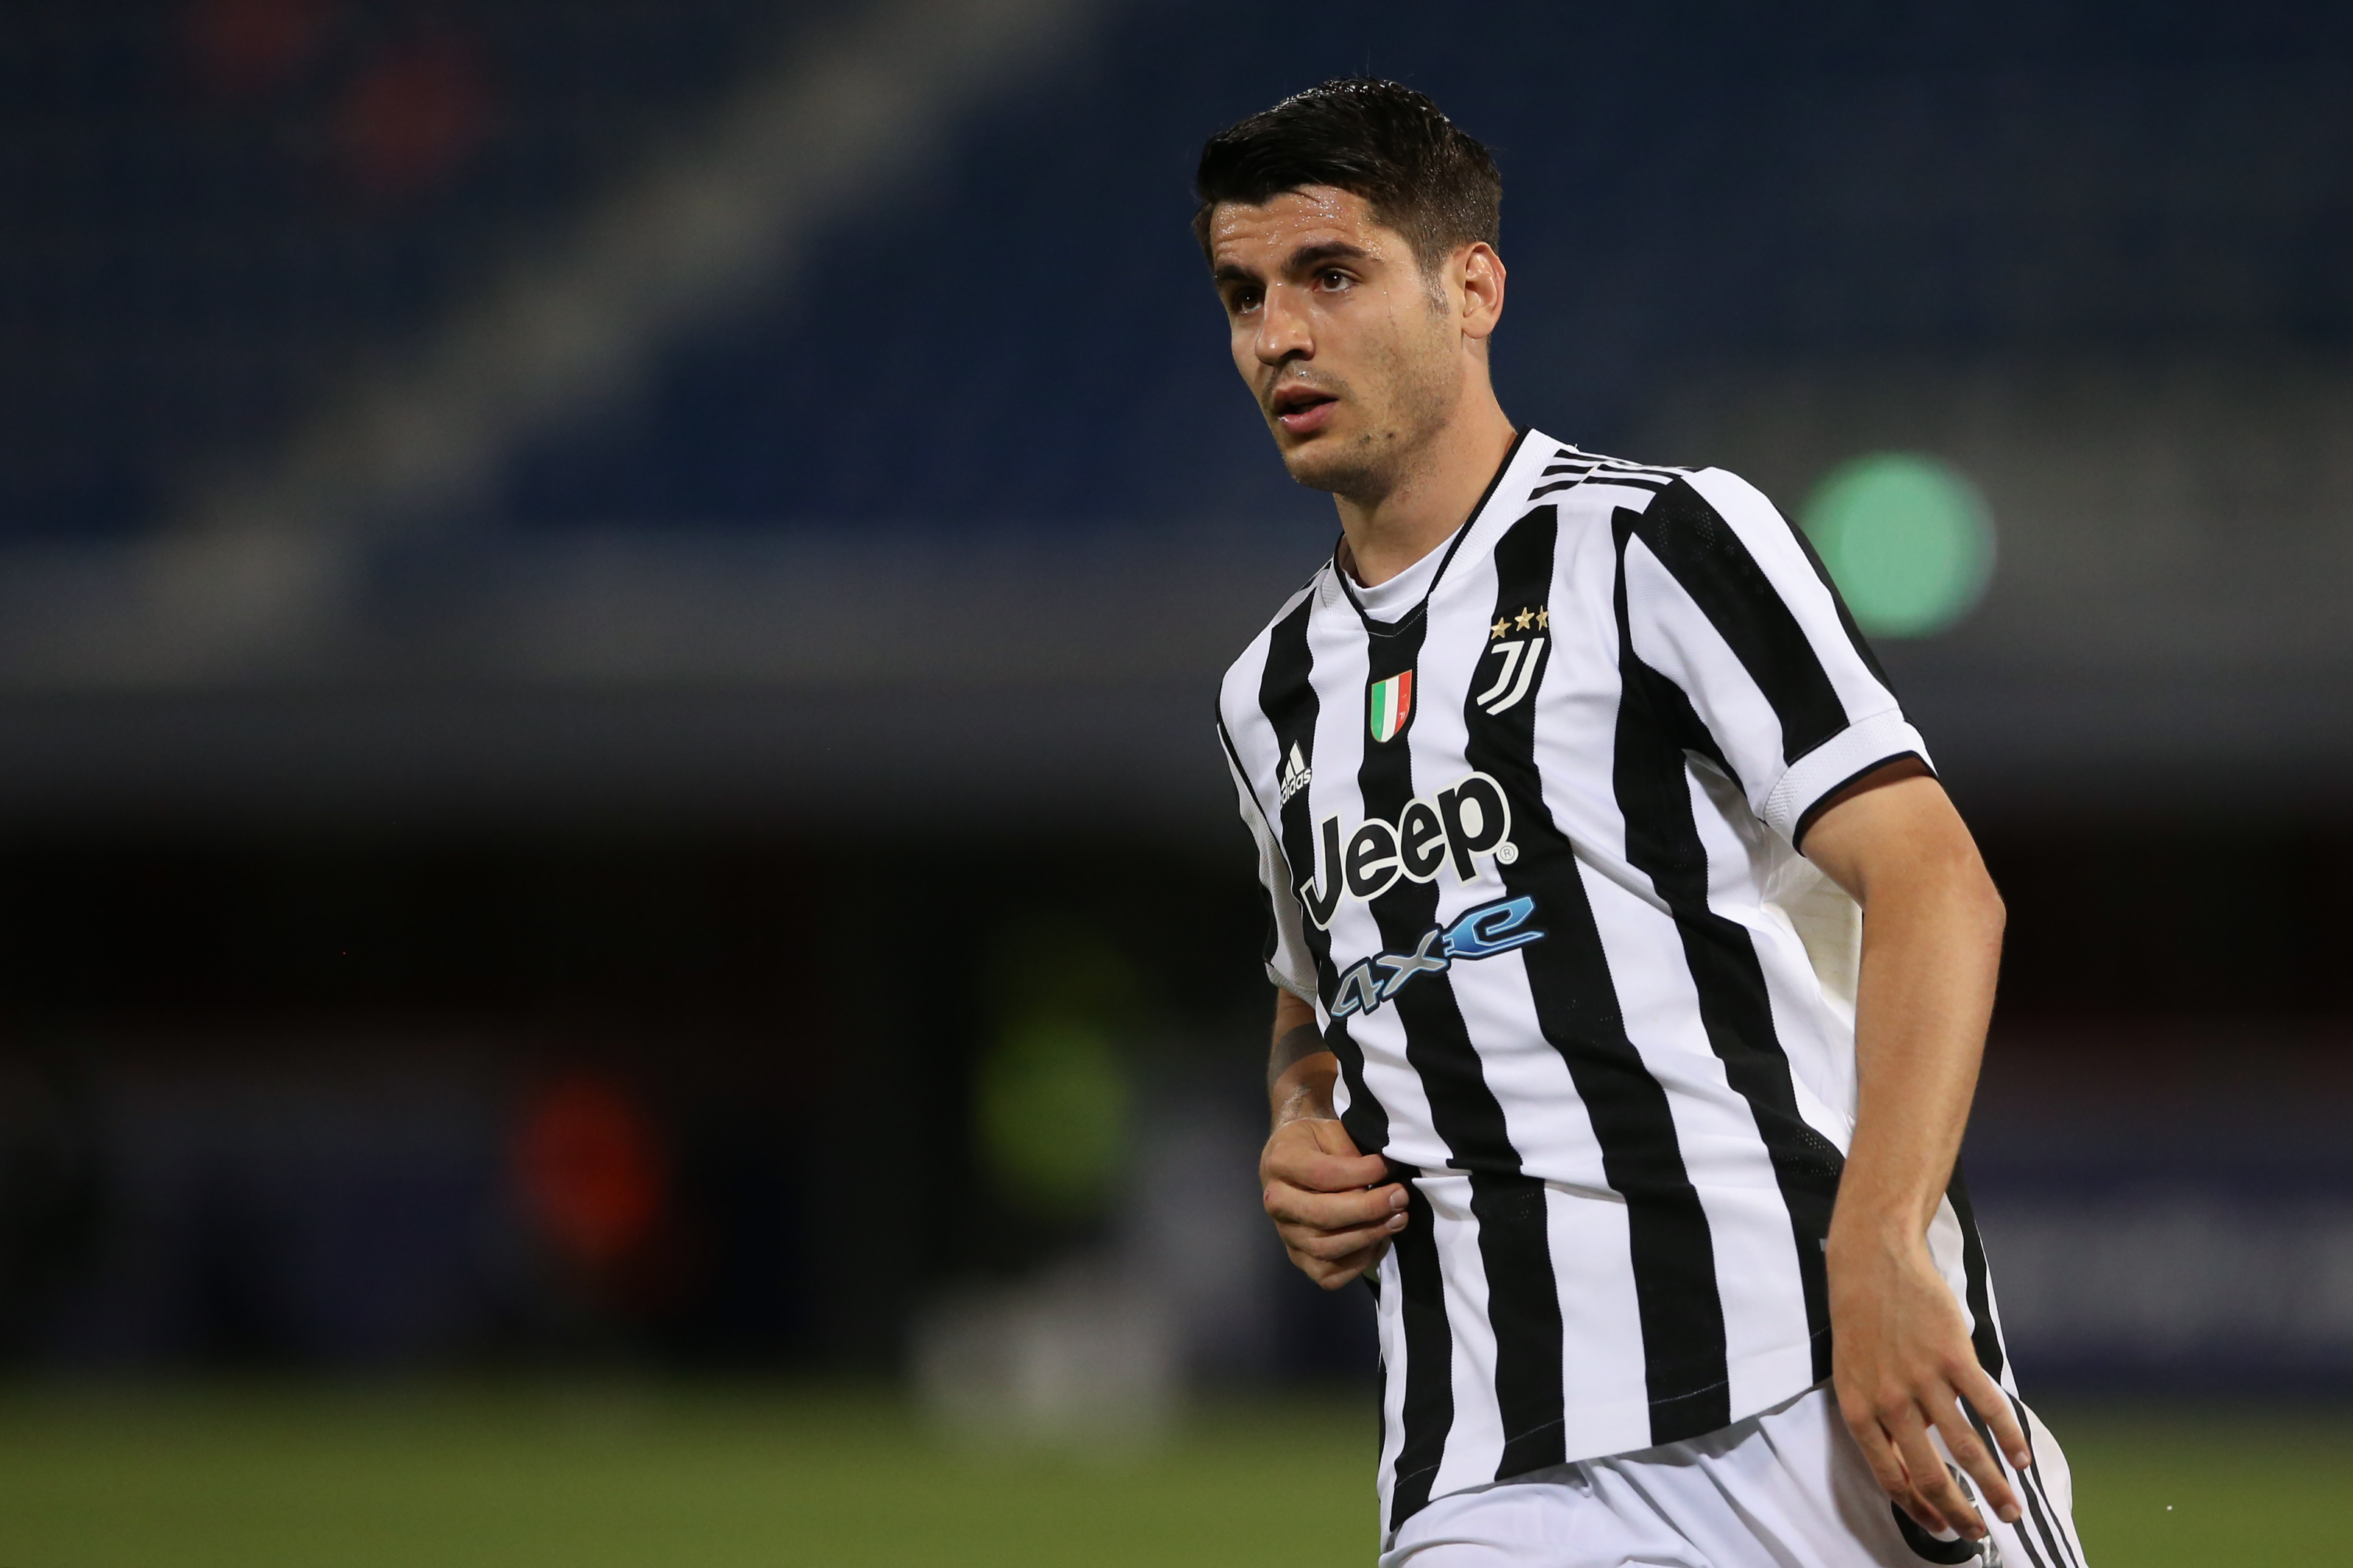 Serie A: Alvaro Morata returns to Atletico Madrid after failed negotiations with Juventus, The Bianconeri post a farewell message after the Spanish forward's loan expiry